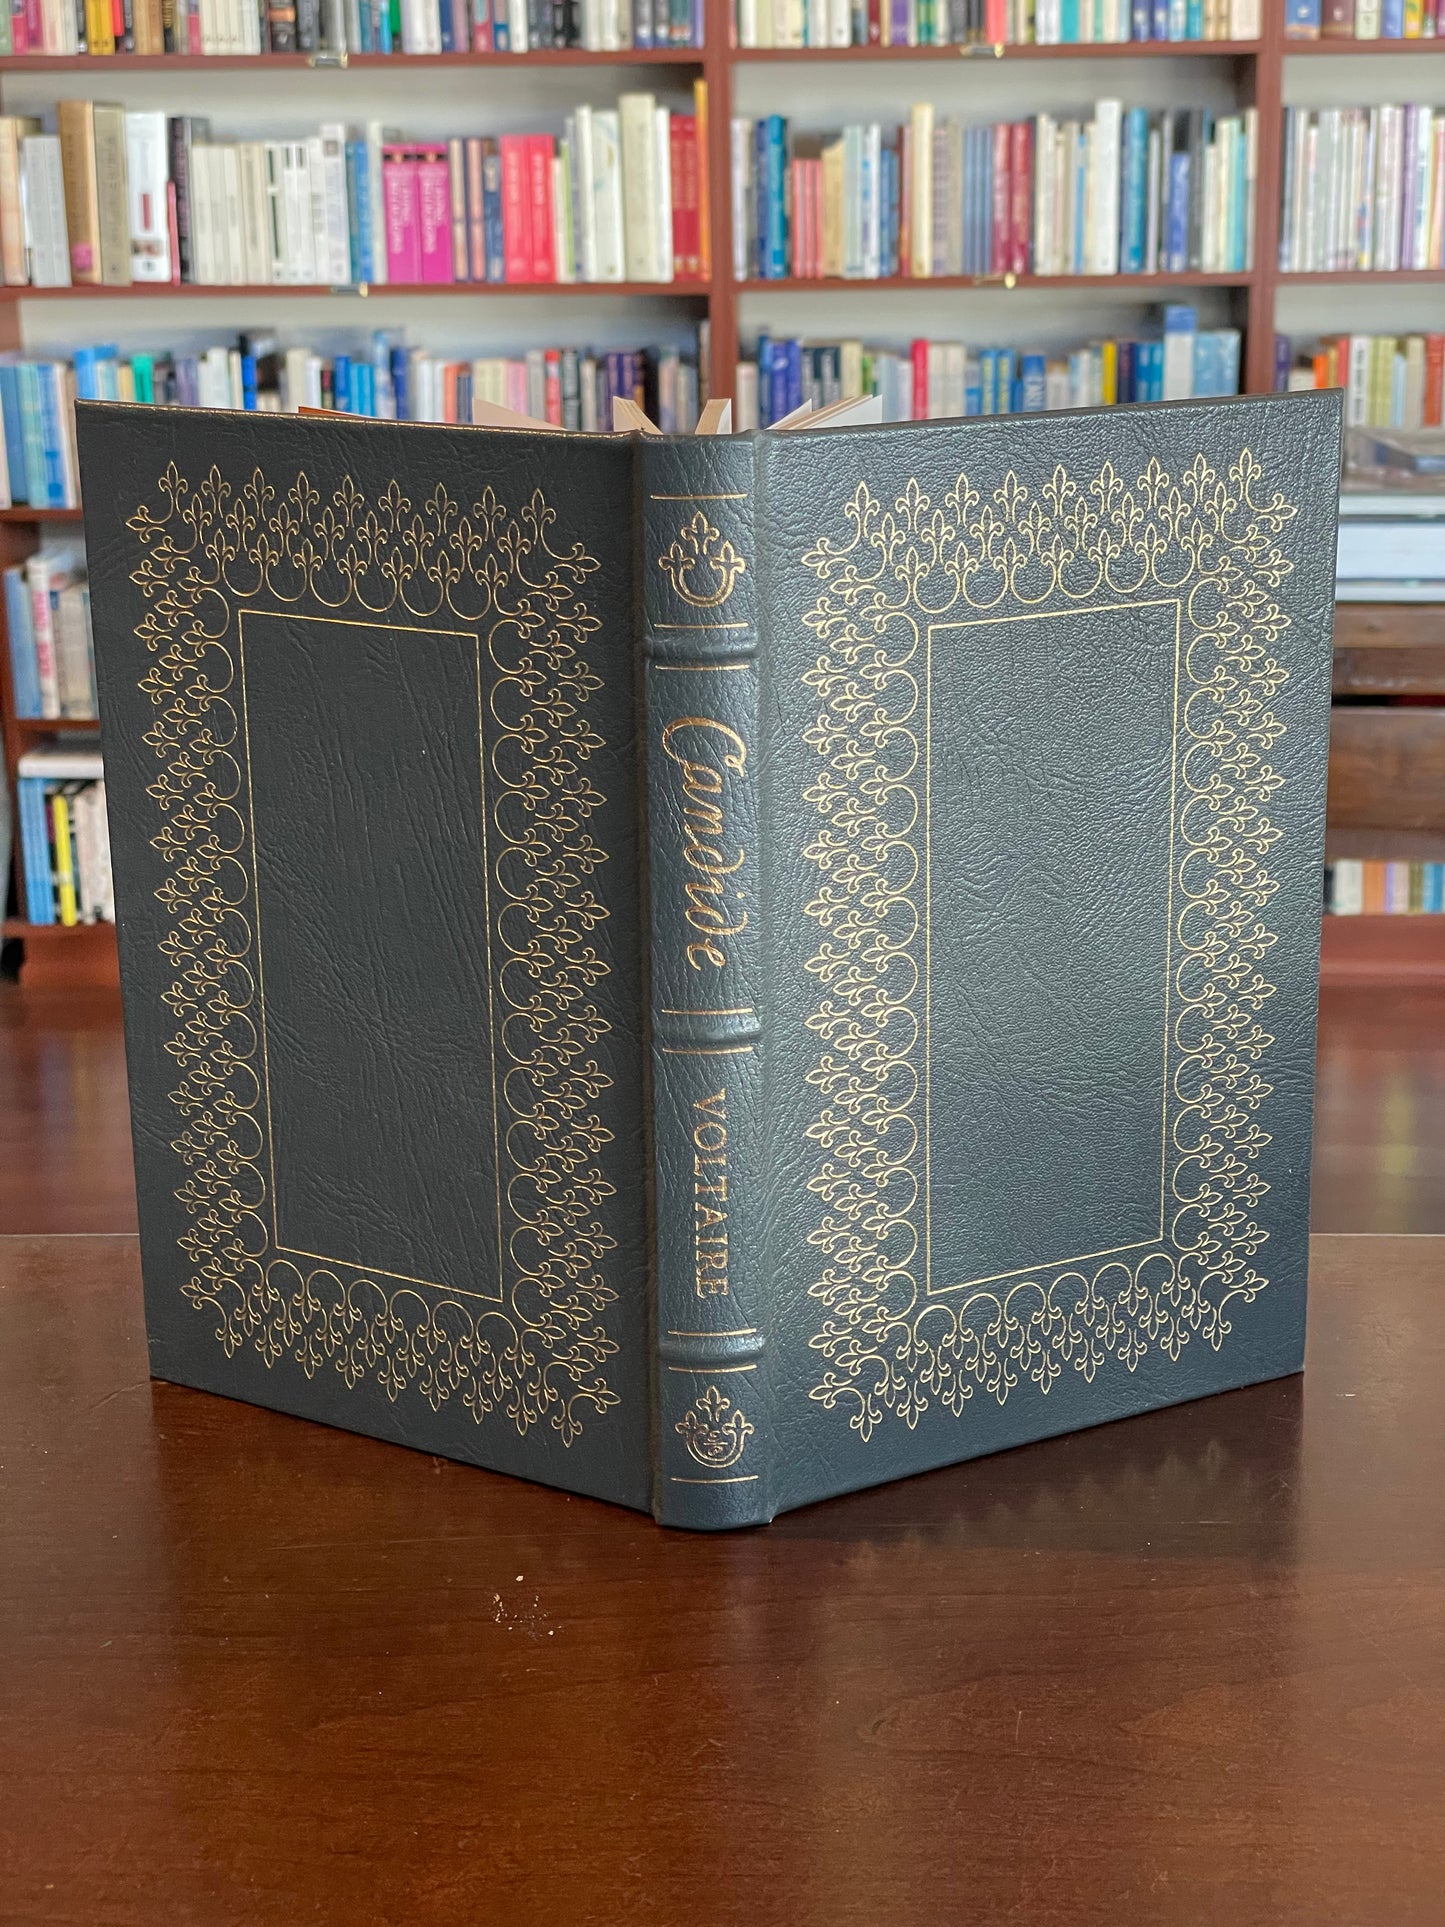 Candide by Voltaire (Easton Press)